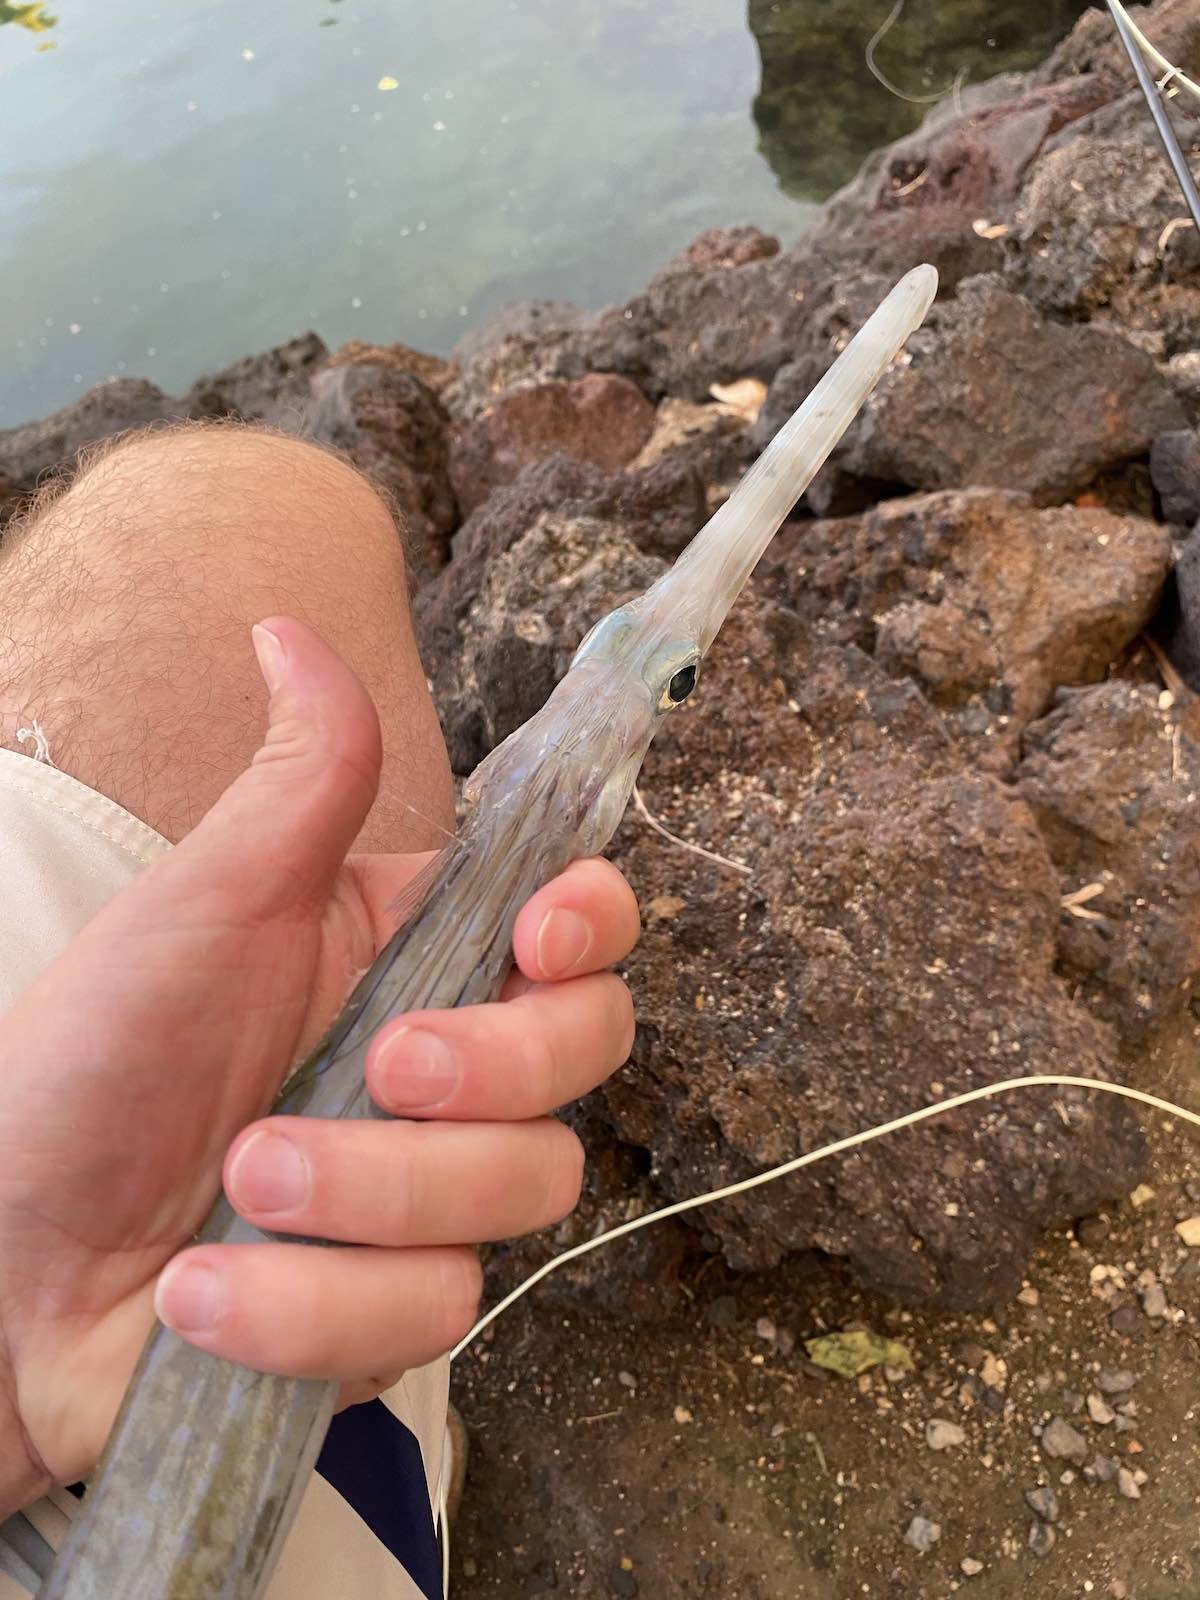 The first cornetfish I caught on a fly